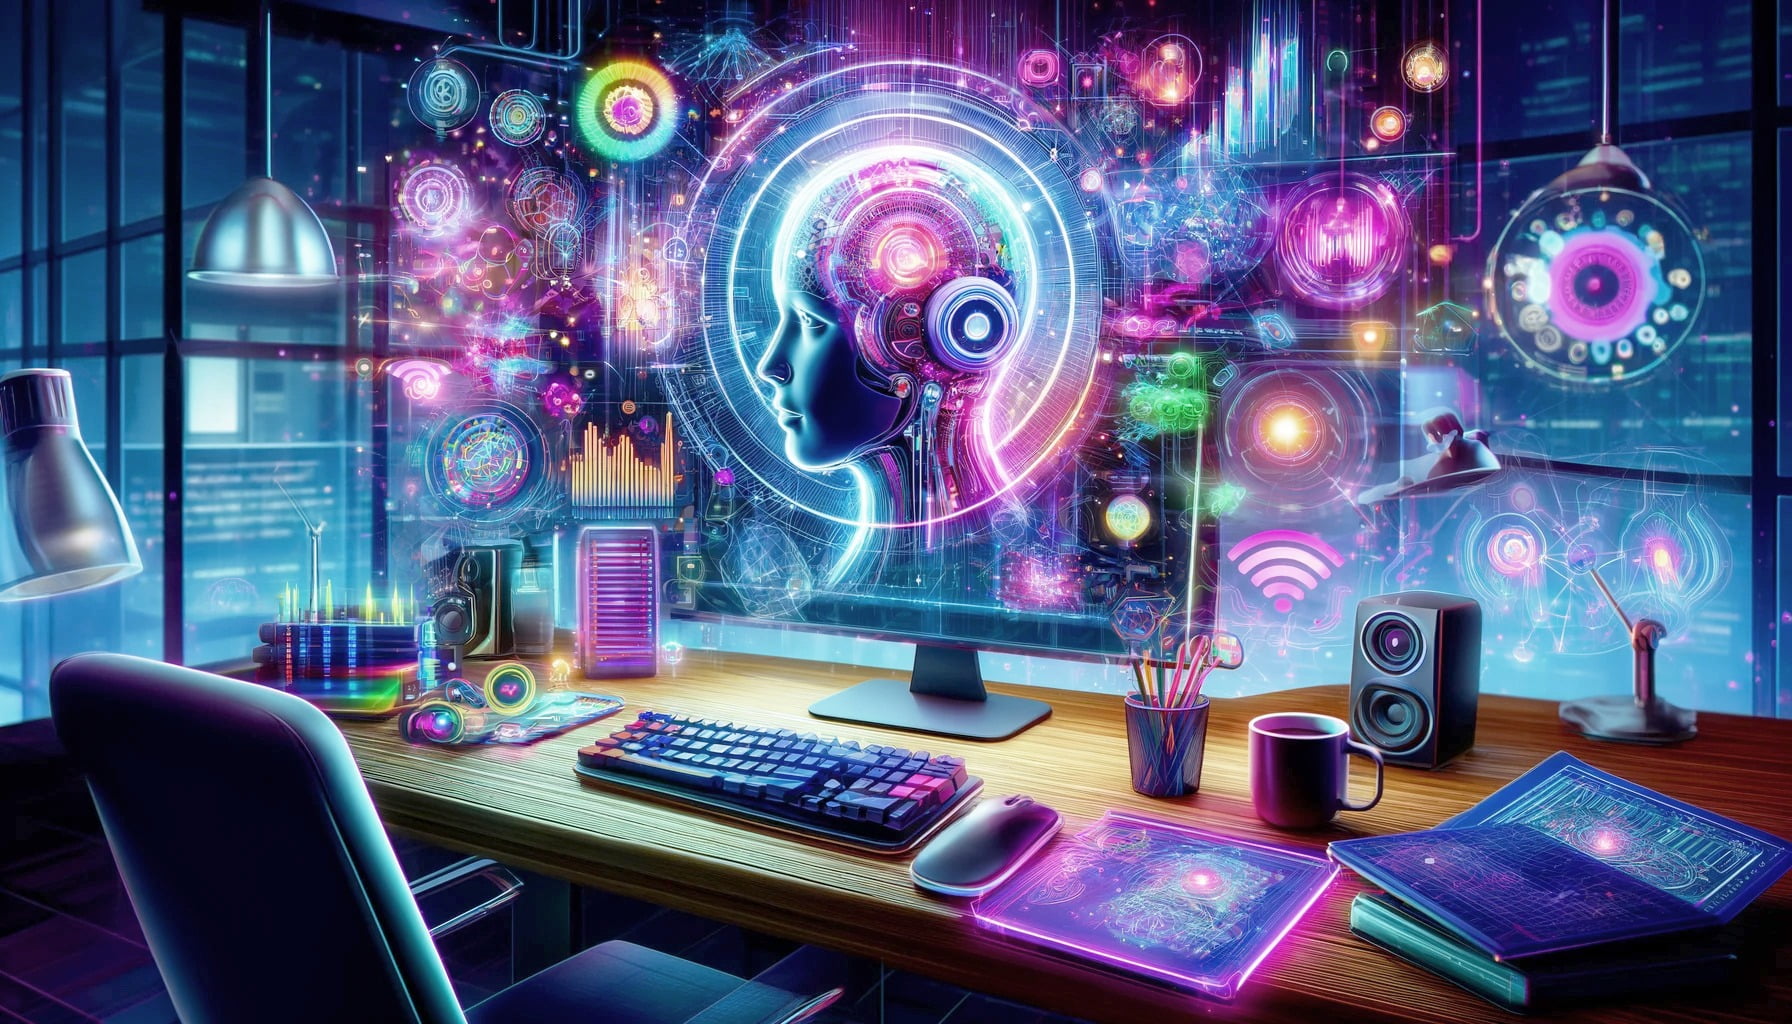 An imaginative and futuristic depiction of an artificial intelligence themed workstation. Holographic displays of a human head profile, intricate networks, and vibrant technological symbols hover above a sleek desk. The room has a dark, neon-lit ambiance with a panoramic window showing a cityscape at night. The desk is equipped with a mechanical keyboard, a modern computer monitor, a mug, and notebooks with glowing edges, all hinting at an advanced, interconnected workspace.